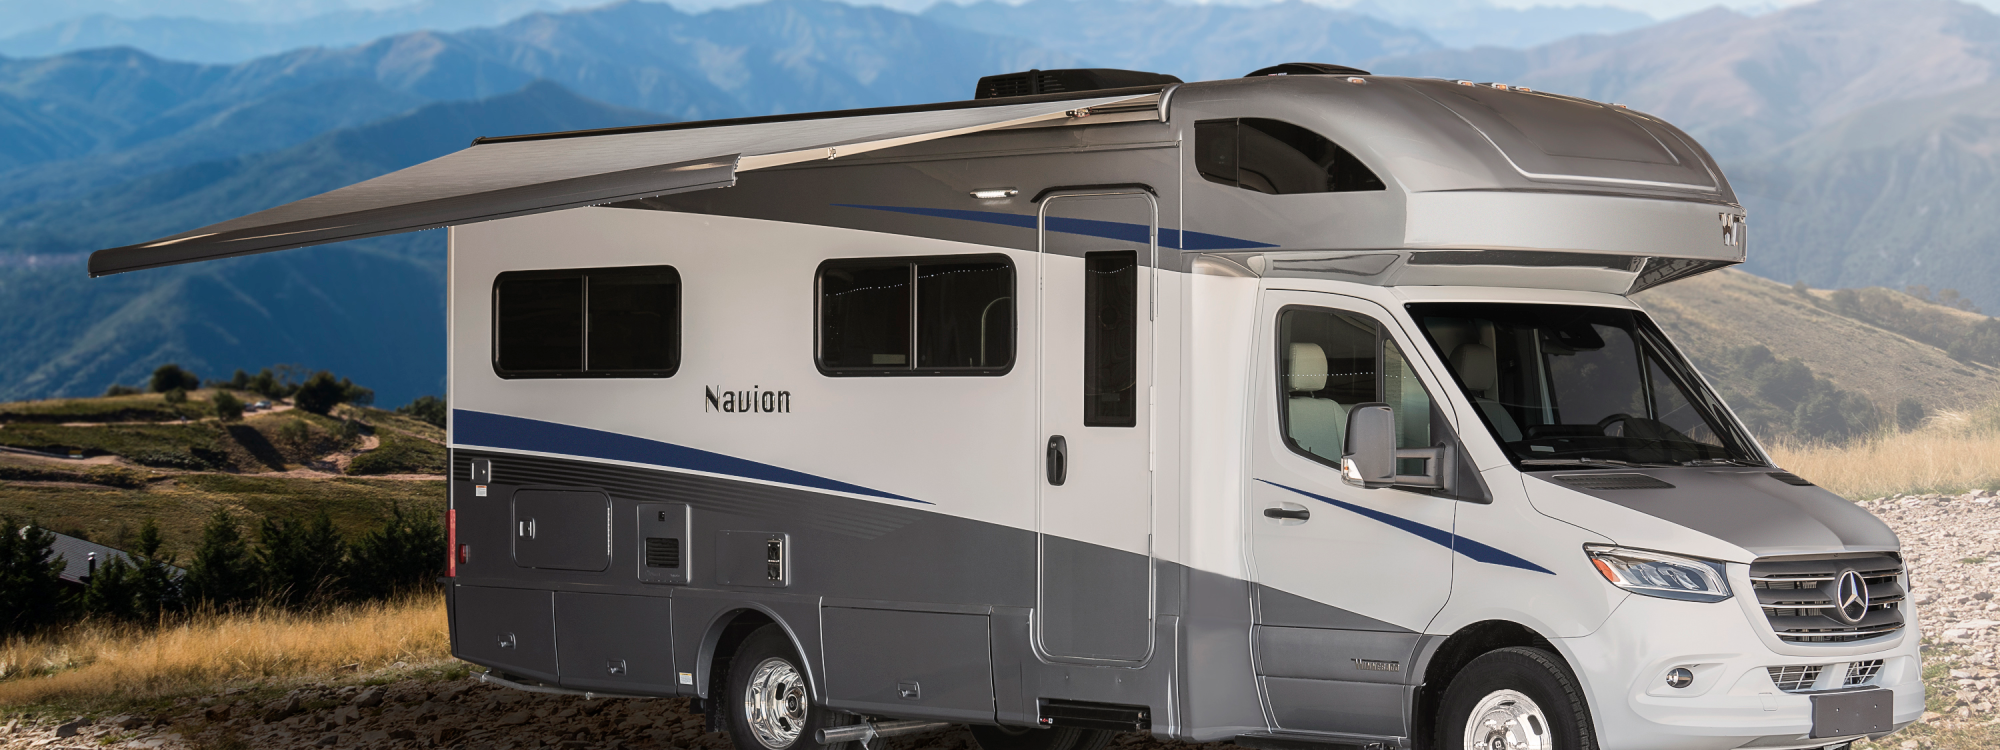 Winnebago Navion with the awning extended on a hilltop